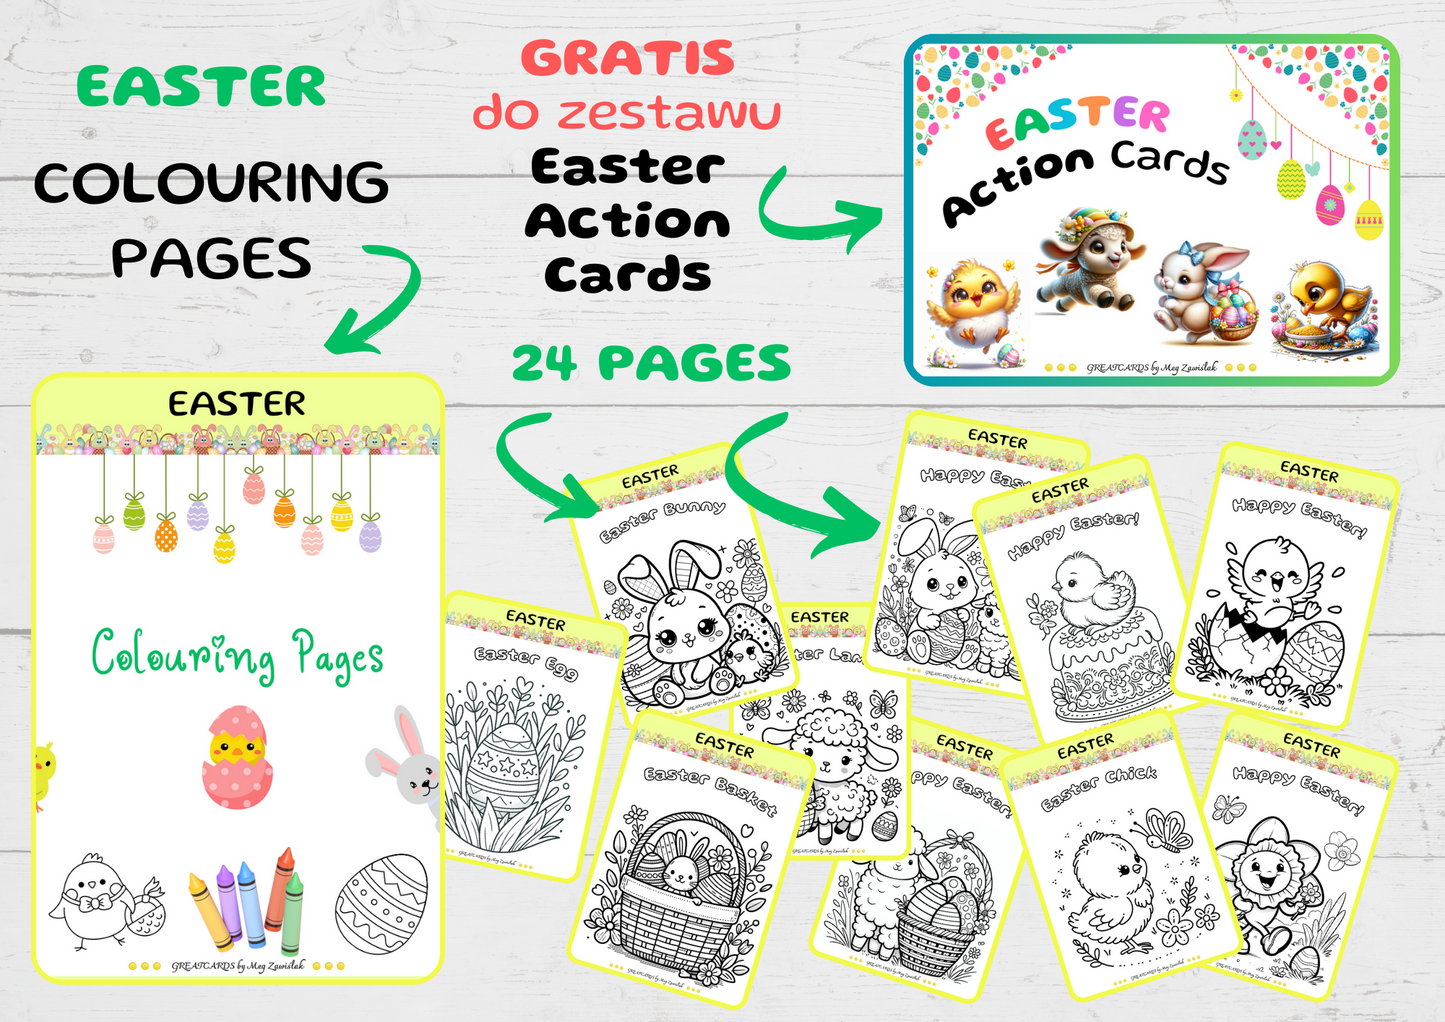 Greatcards - Easter Action Cards